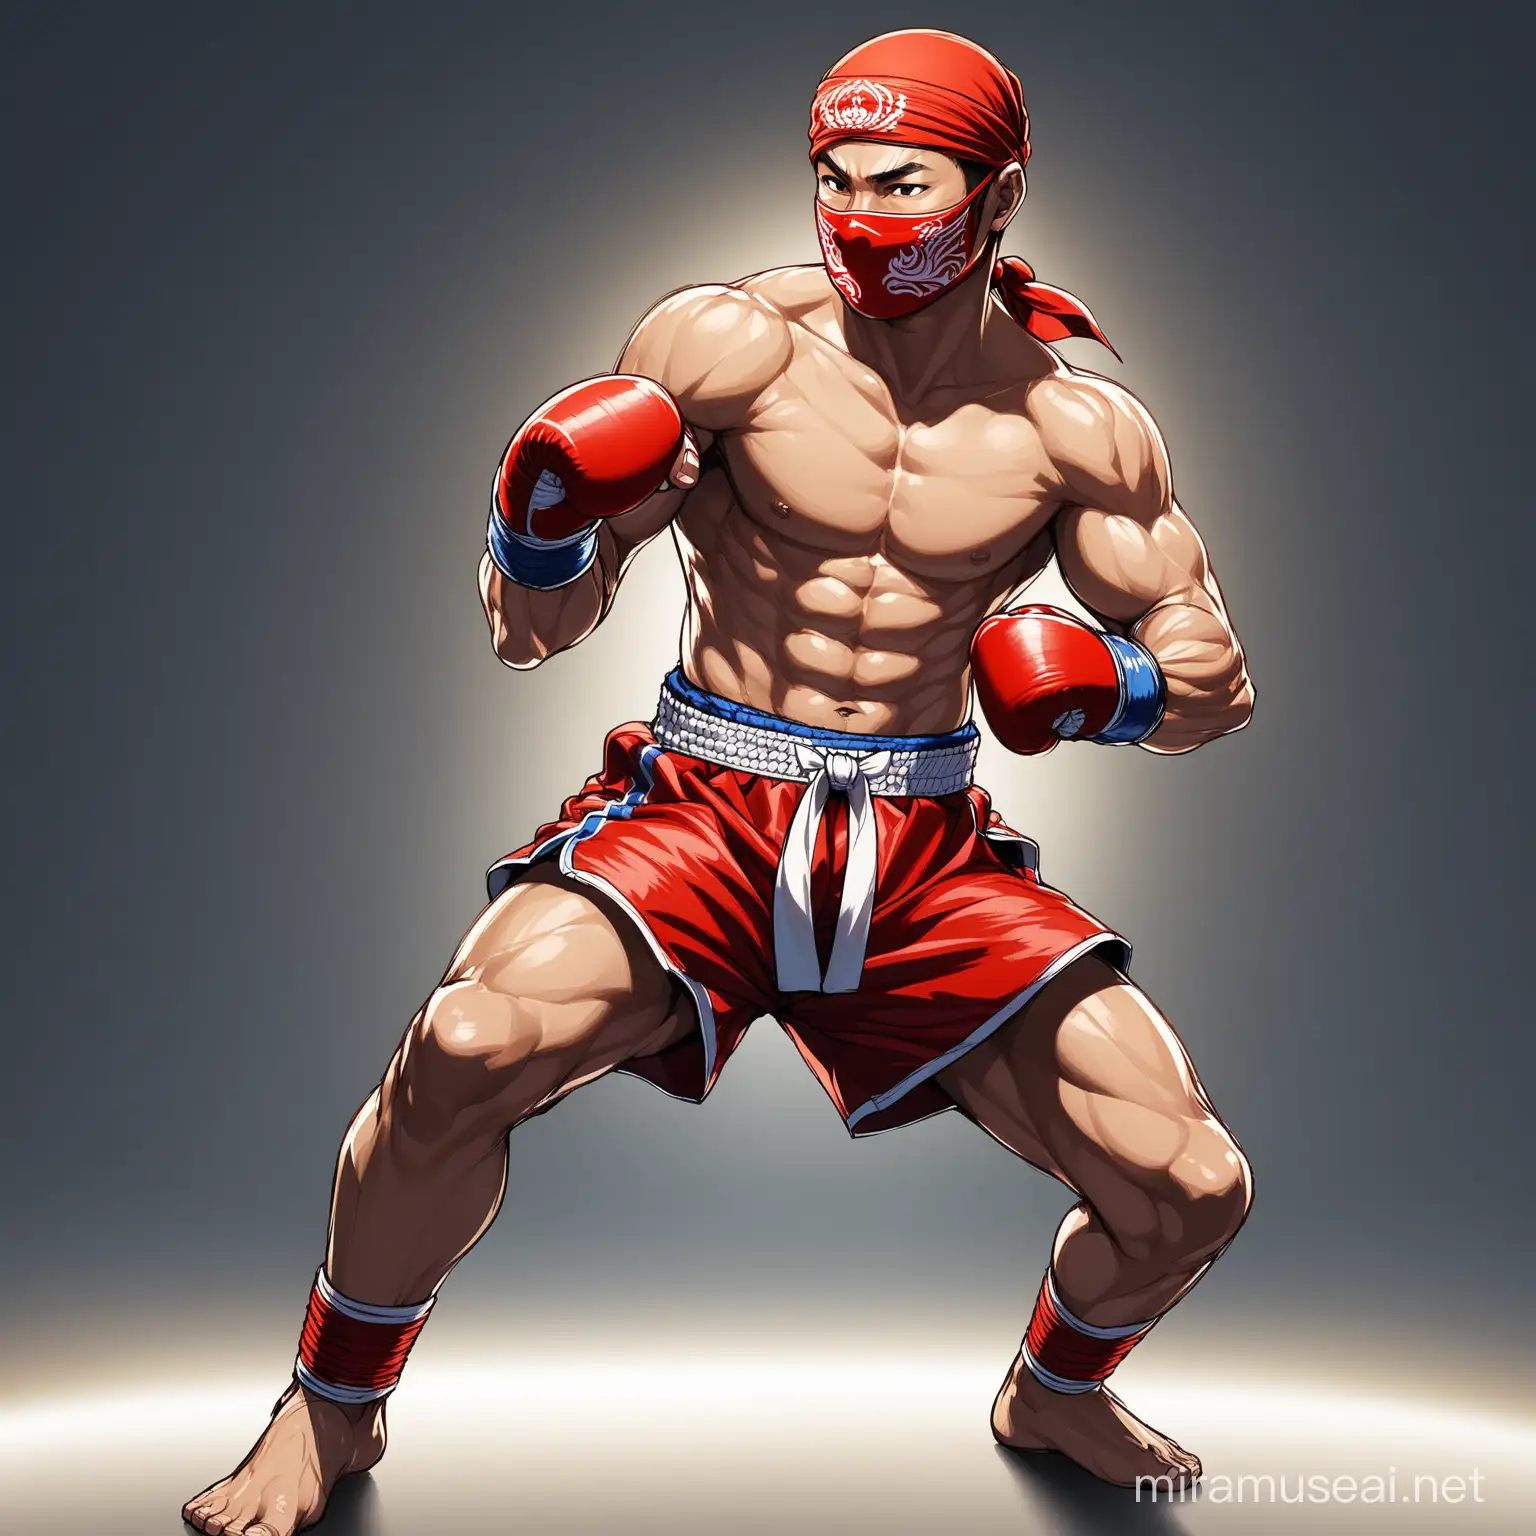 MALE CHARACTER, MUAY THAI FIGHTER, FIGHTING POSE, HOODED JACKET, BANDANA ON FACE